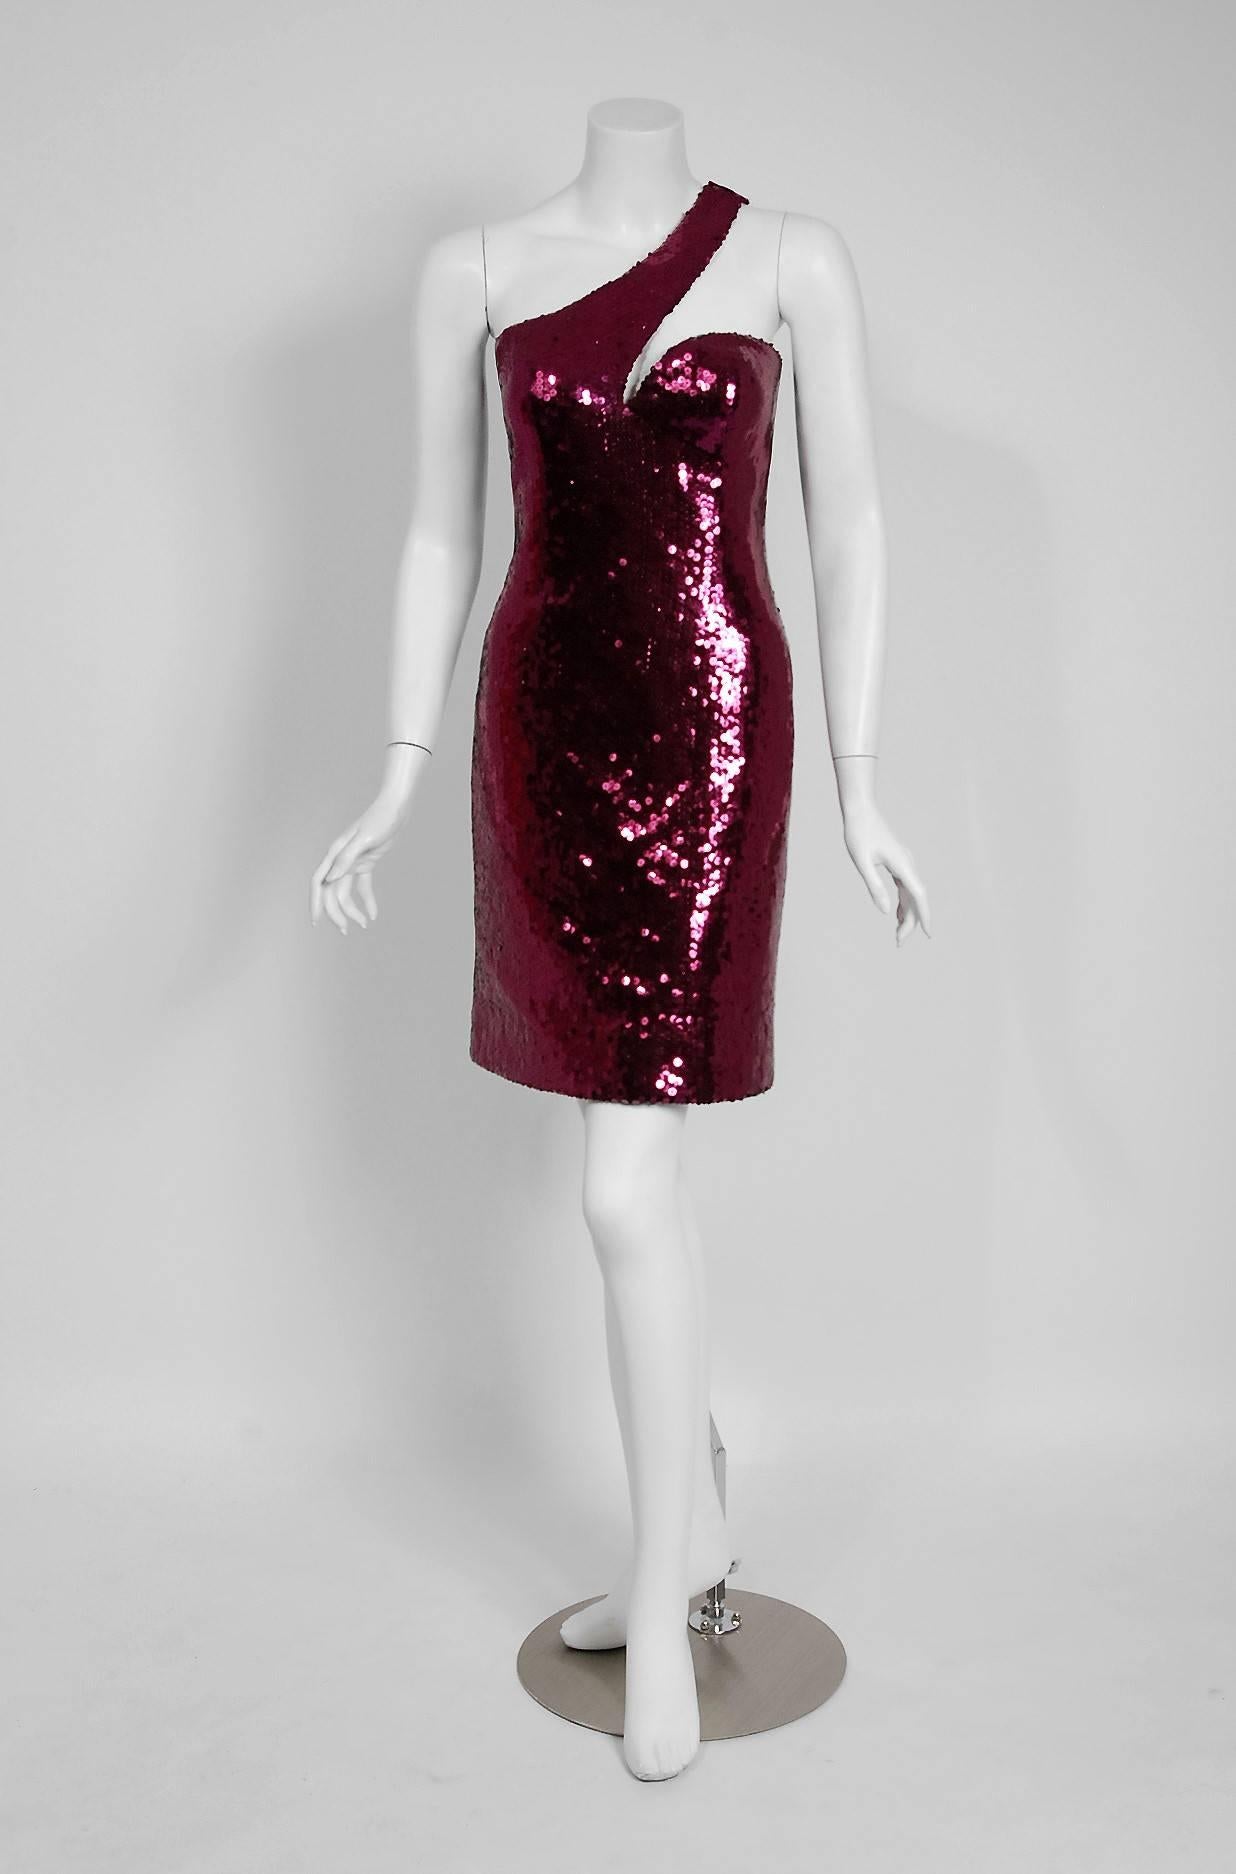 Seductive Loris Azzaro Couture fuchsia-pink sequin showstopper dating back to his 1975 collection. Loris Azzaro was famous for creating glamorous and provocative customized garments for celebrity elite. His timeless designs were favorites to